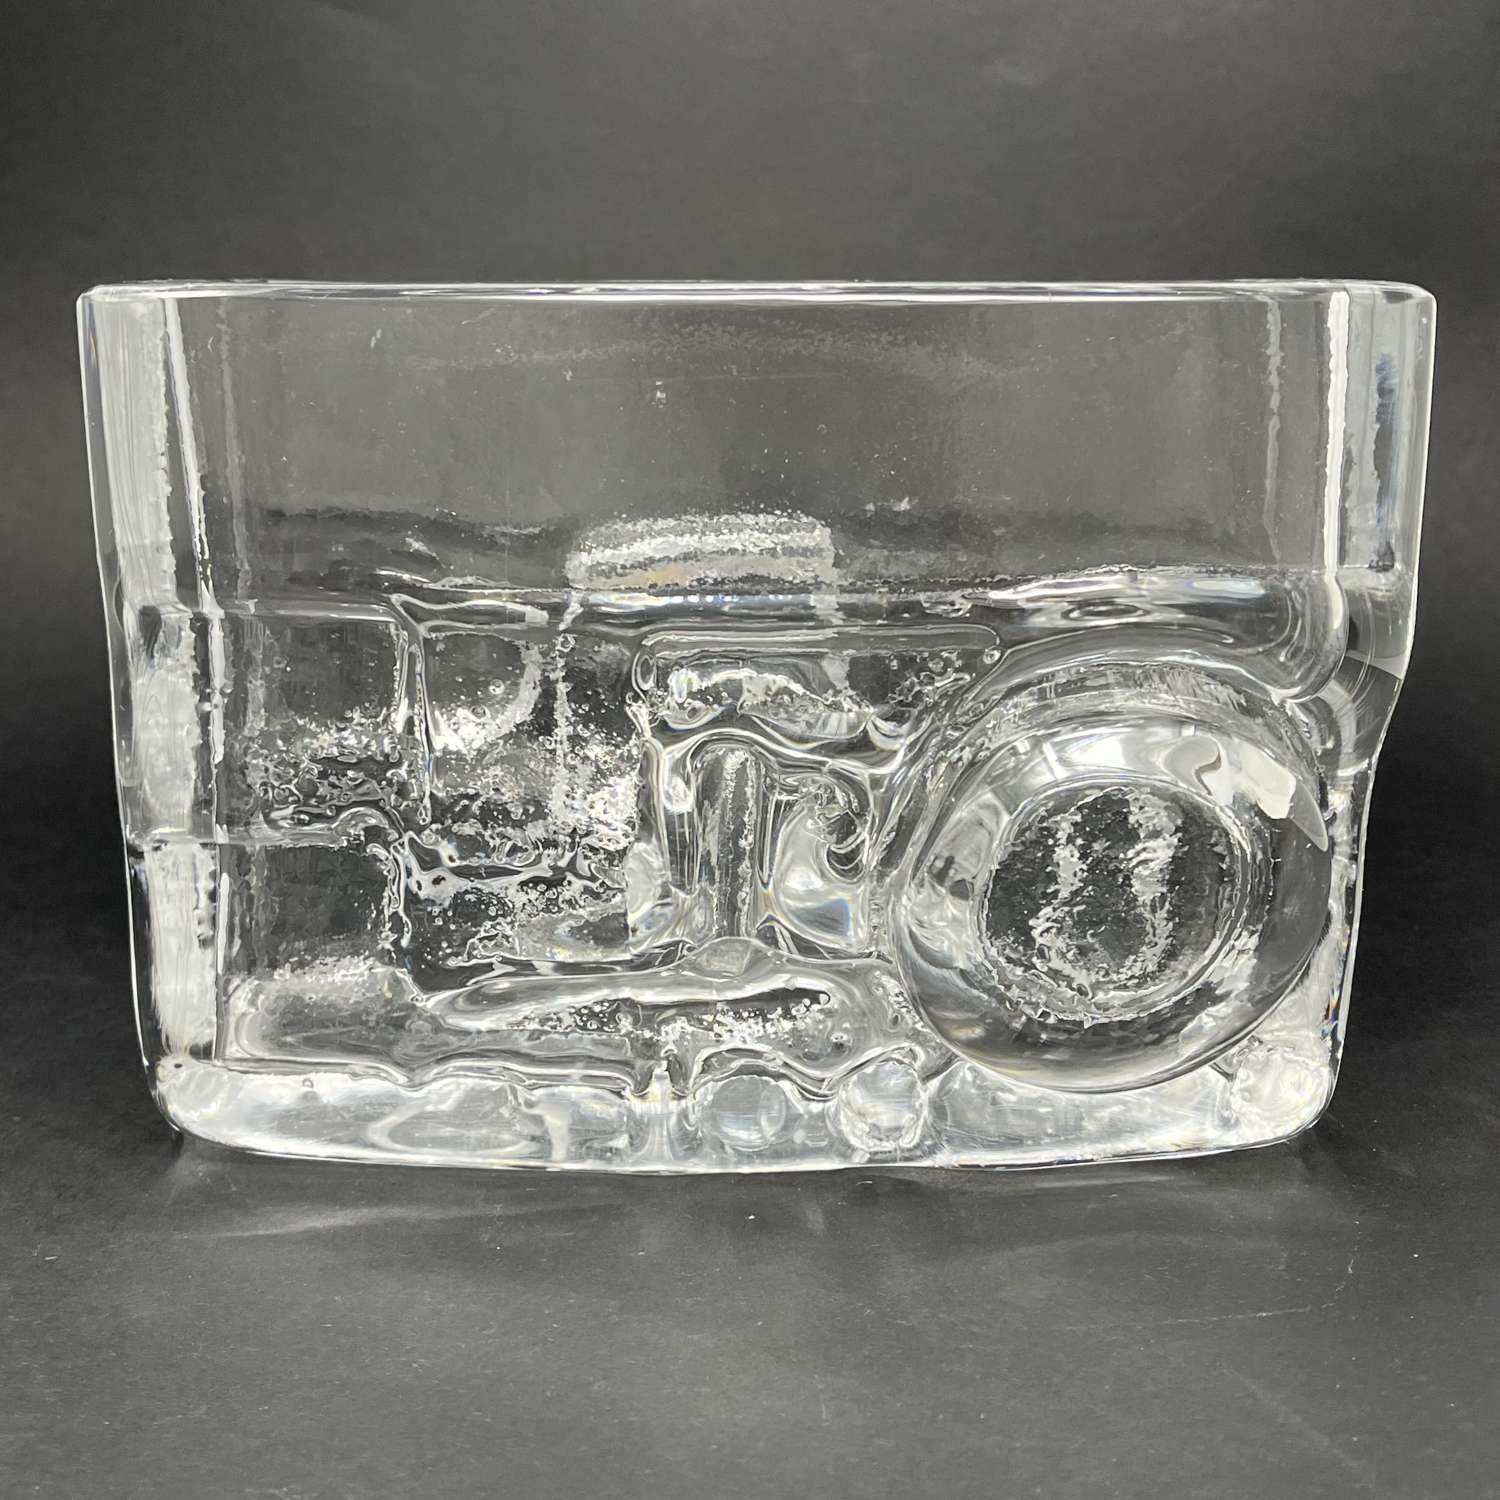 Peill and Putzler brutalist glass vase West Germany 1970s